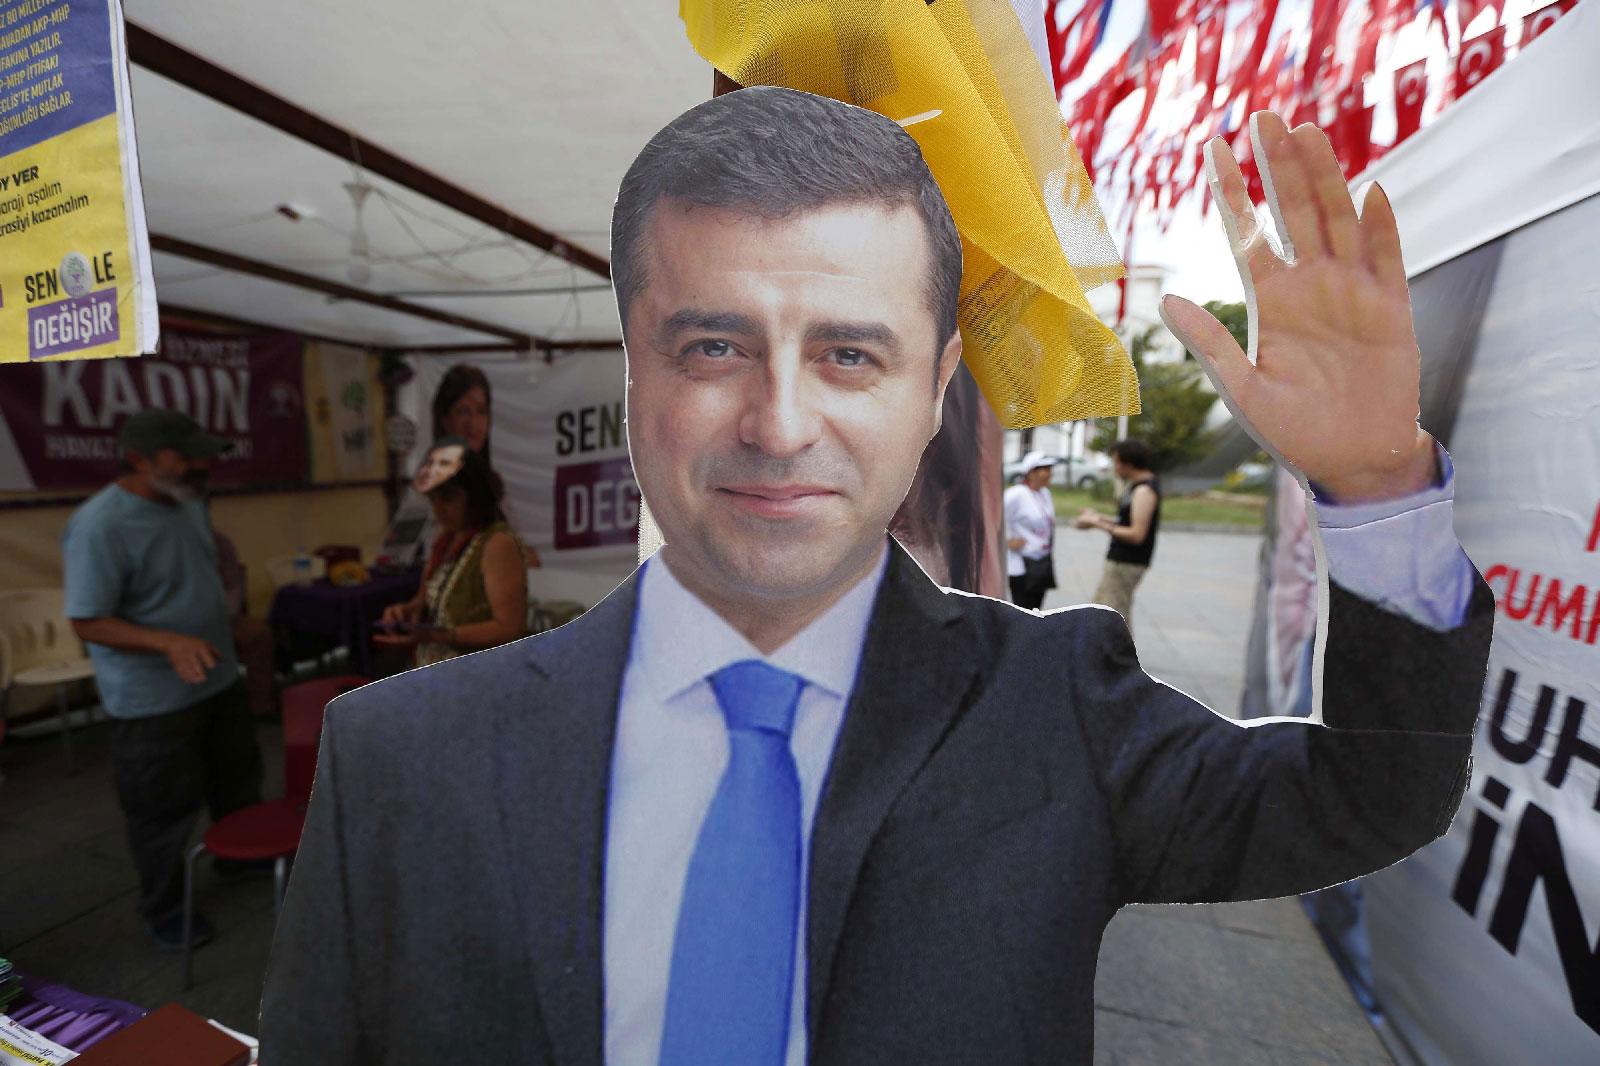 A cardboard cut-out of Selahattin Demirtas, the jailed former co-chair and the presidential candidate of the pro-Kurdish Peoples' Democratic Party, (HDP) who is fighting terrorism-related charges.